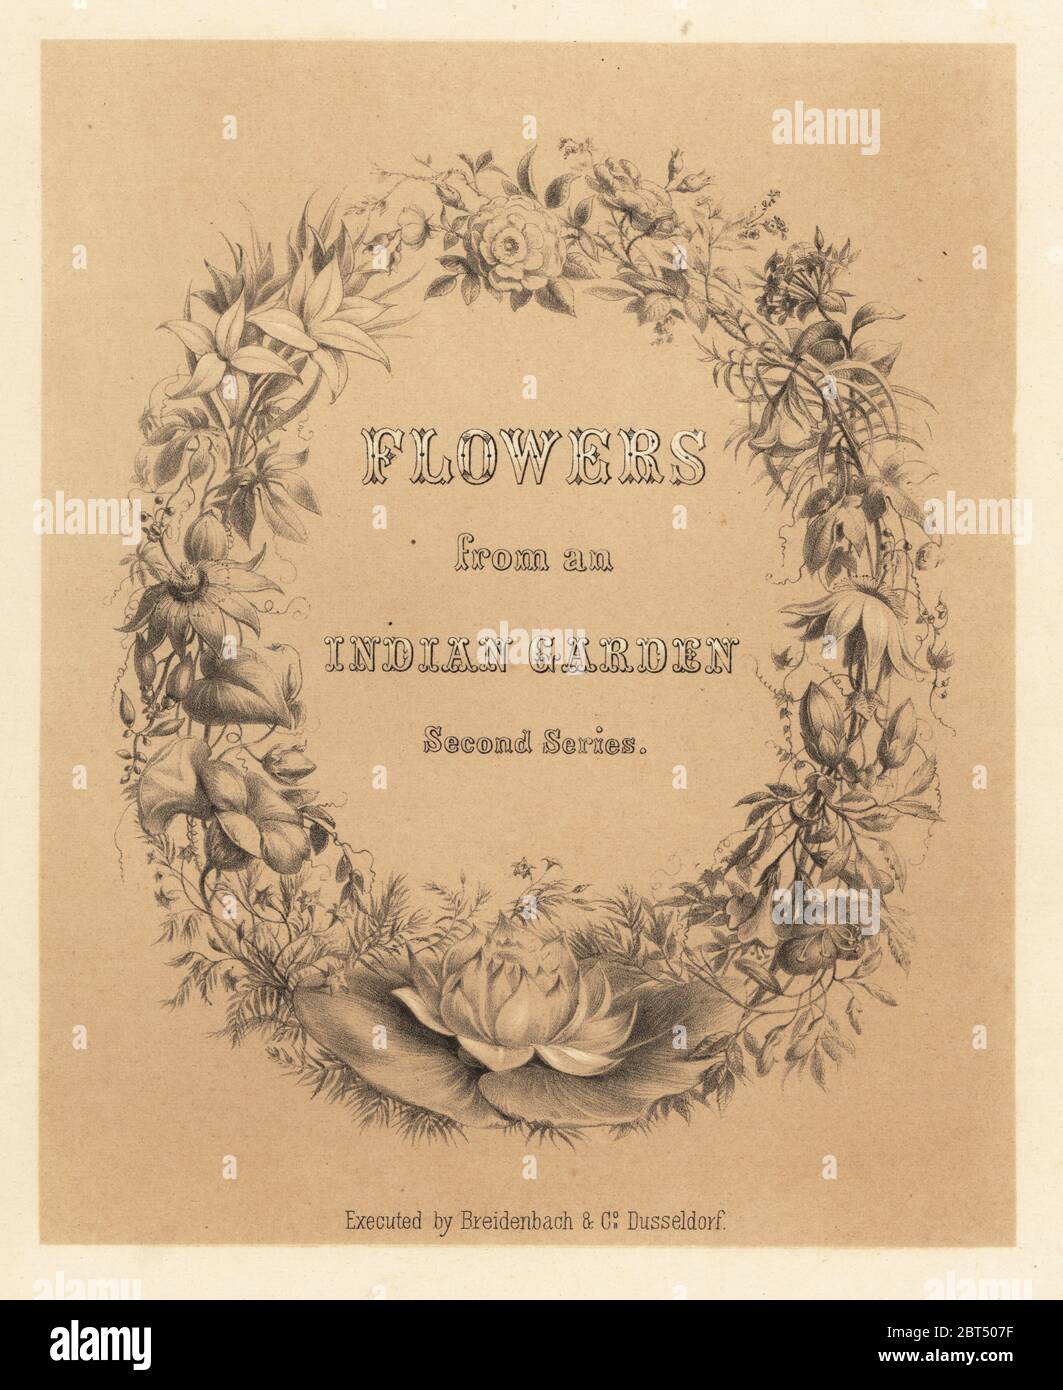 Calligraphic title page with wreath of flowers. Tinted lithograph from Emily Edens Flowers from an Indian Garden: Second Series: Hope, Breidenbach & Co, Dusseldorf, 1860s. Eden was an English female aristocratic writer, novelist and traveler who accompanied her brother George in India from 1836 to 1842. Stock Photo